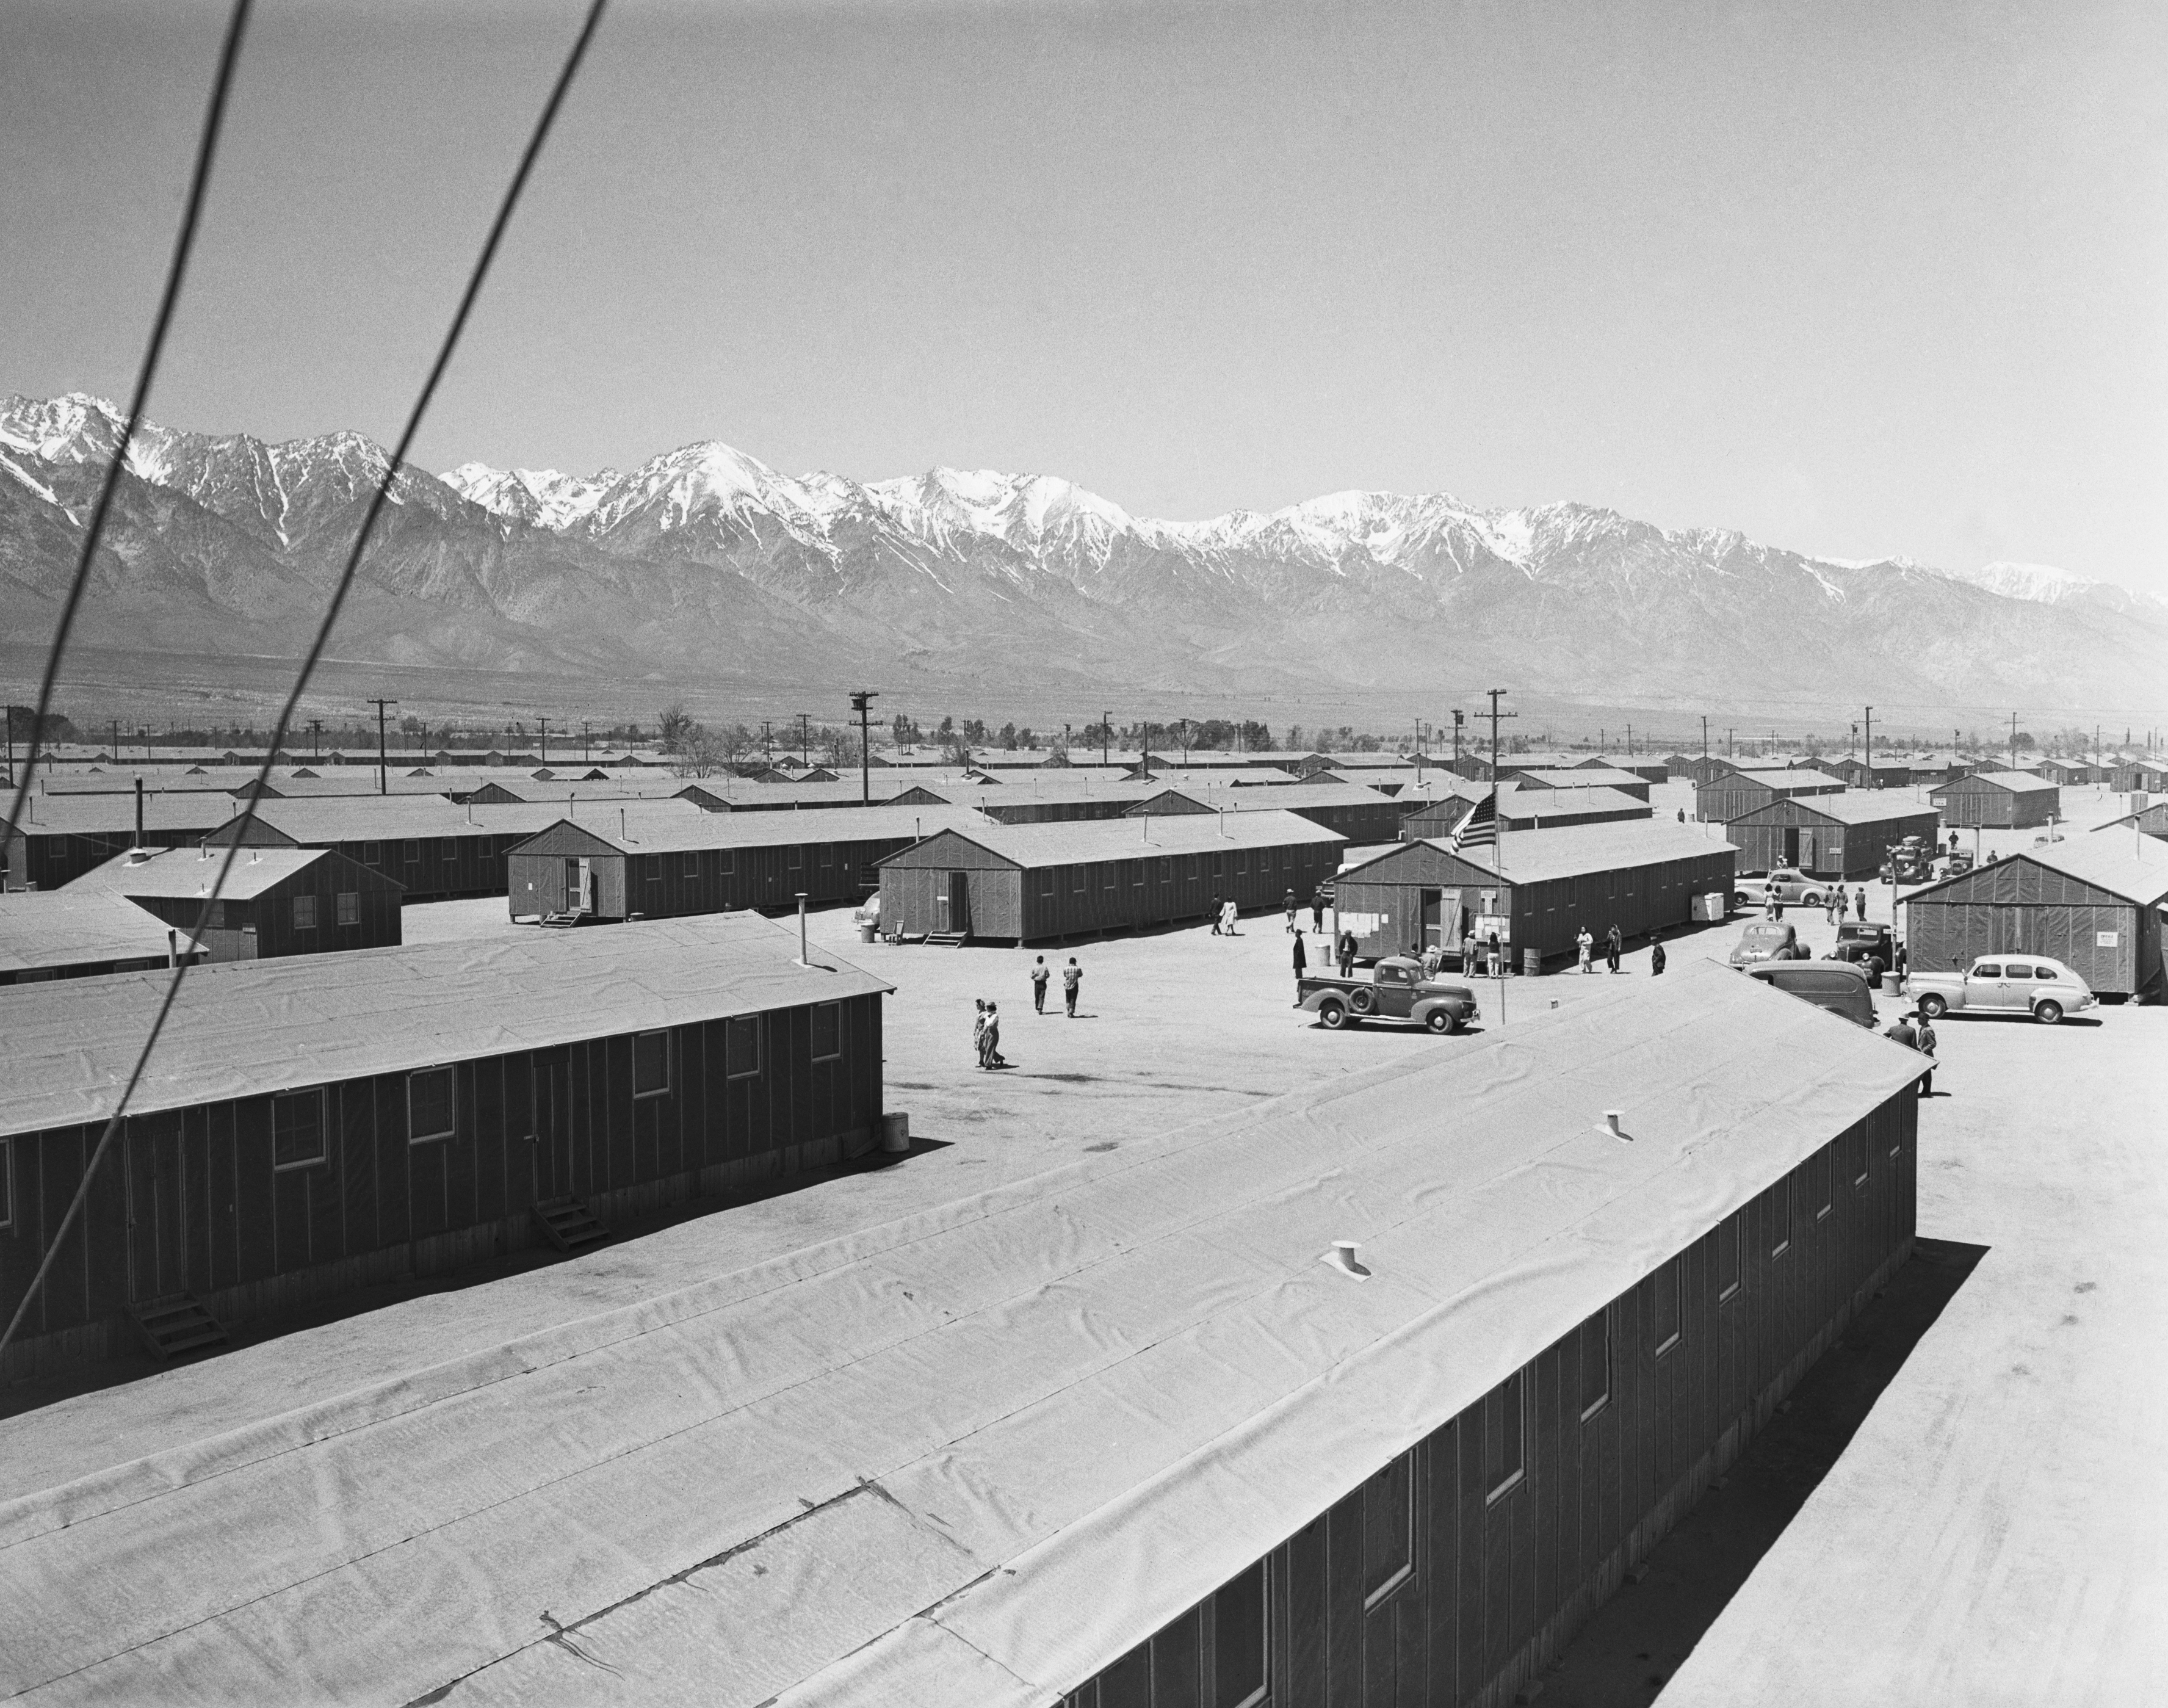 The Manzanar War Relocation Center in Inyo County, Calif., pictured in 1942 (Bettmann Archive)